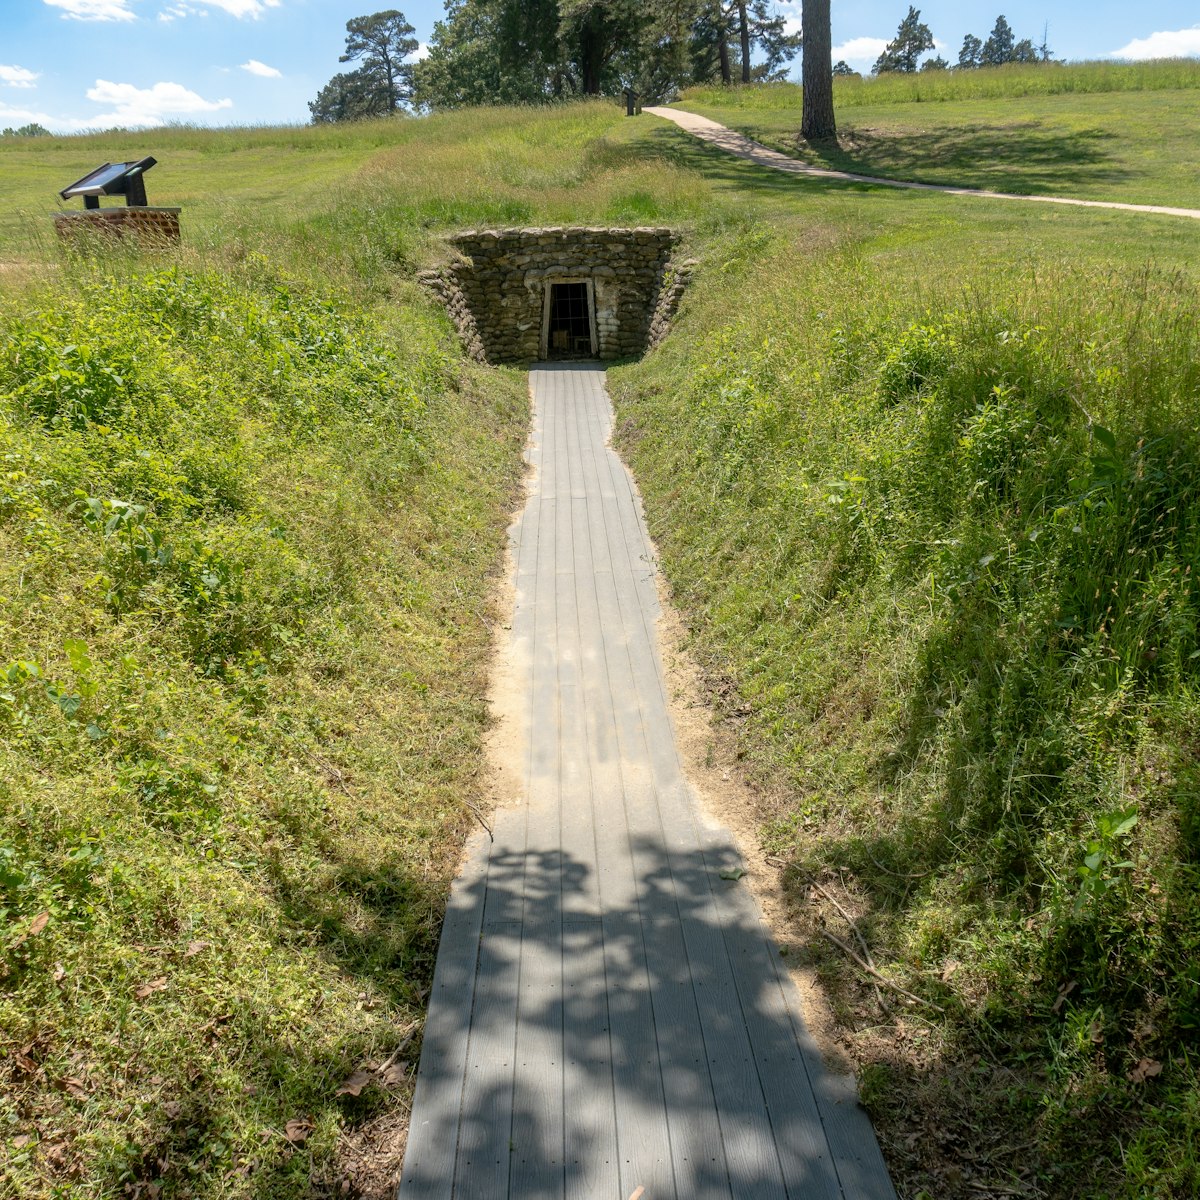 A recreated mine entrance at Petersburg National Battlefield.